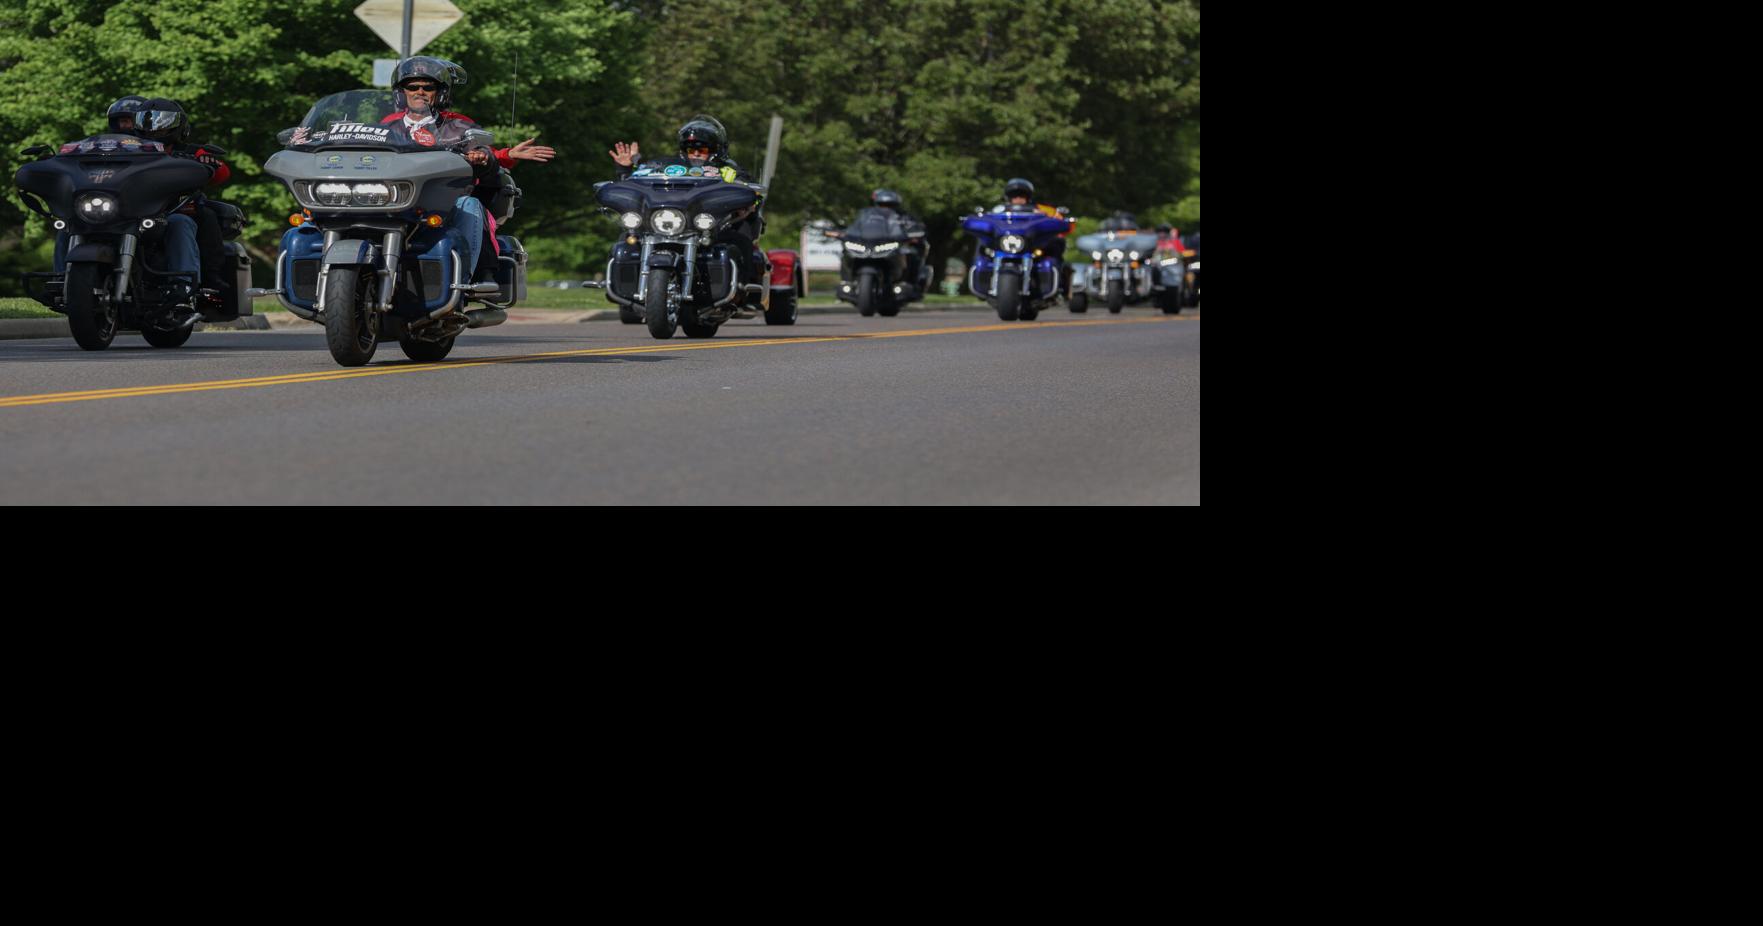 Petty Charity Ride raises $1.8M for Victory Junction